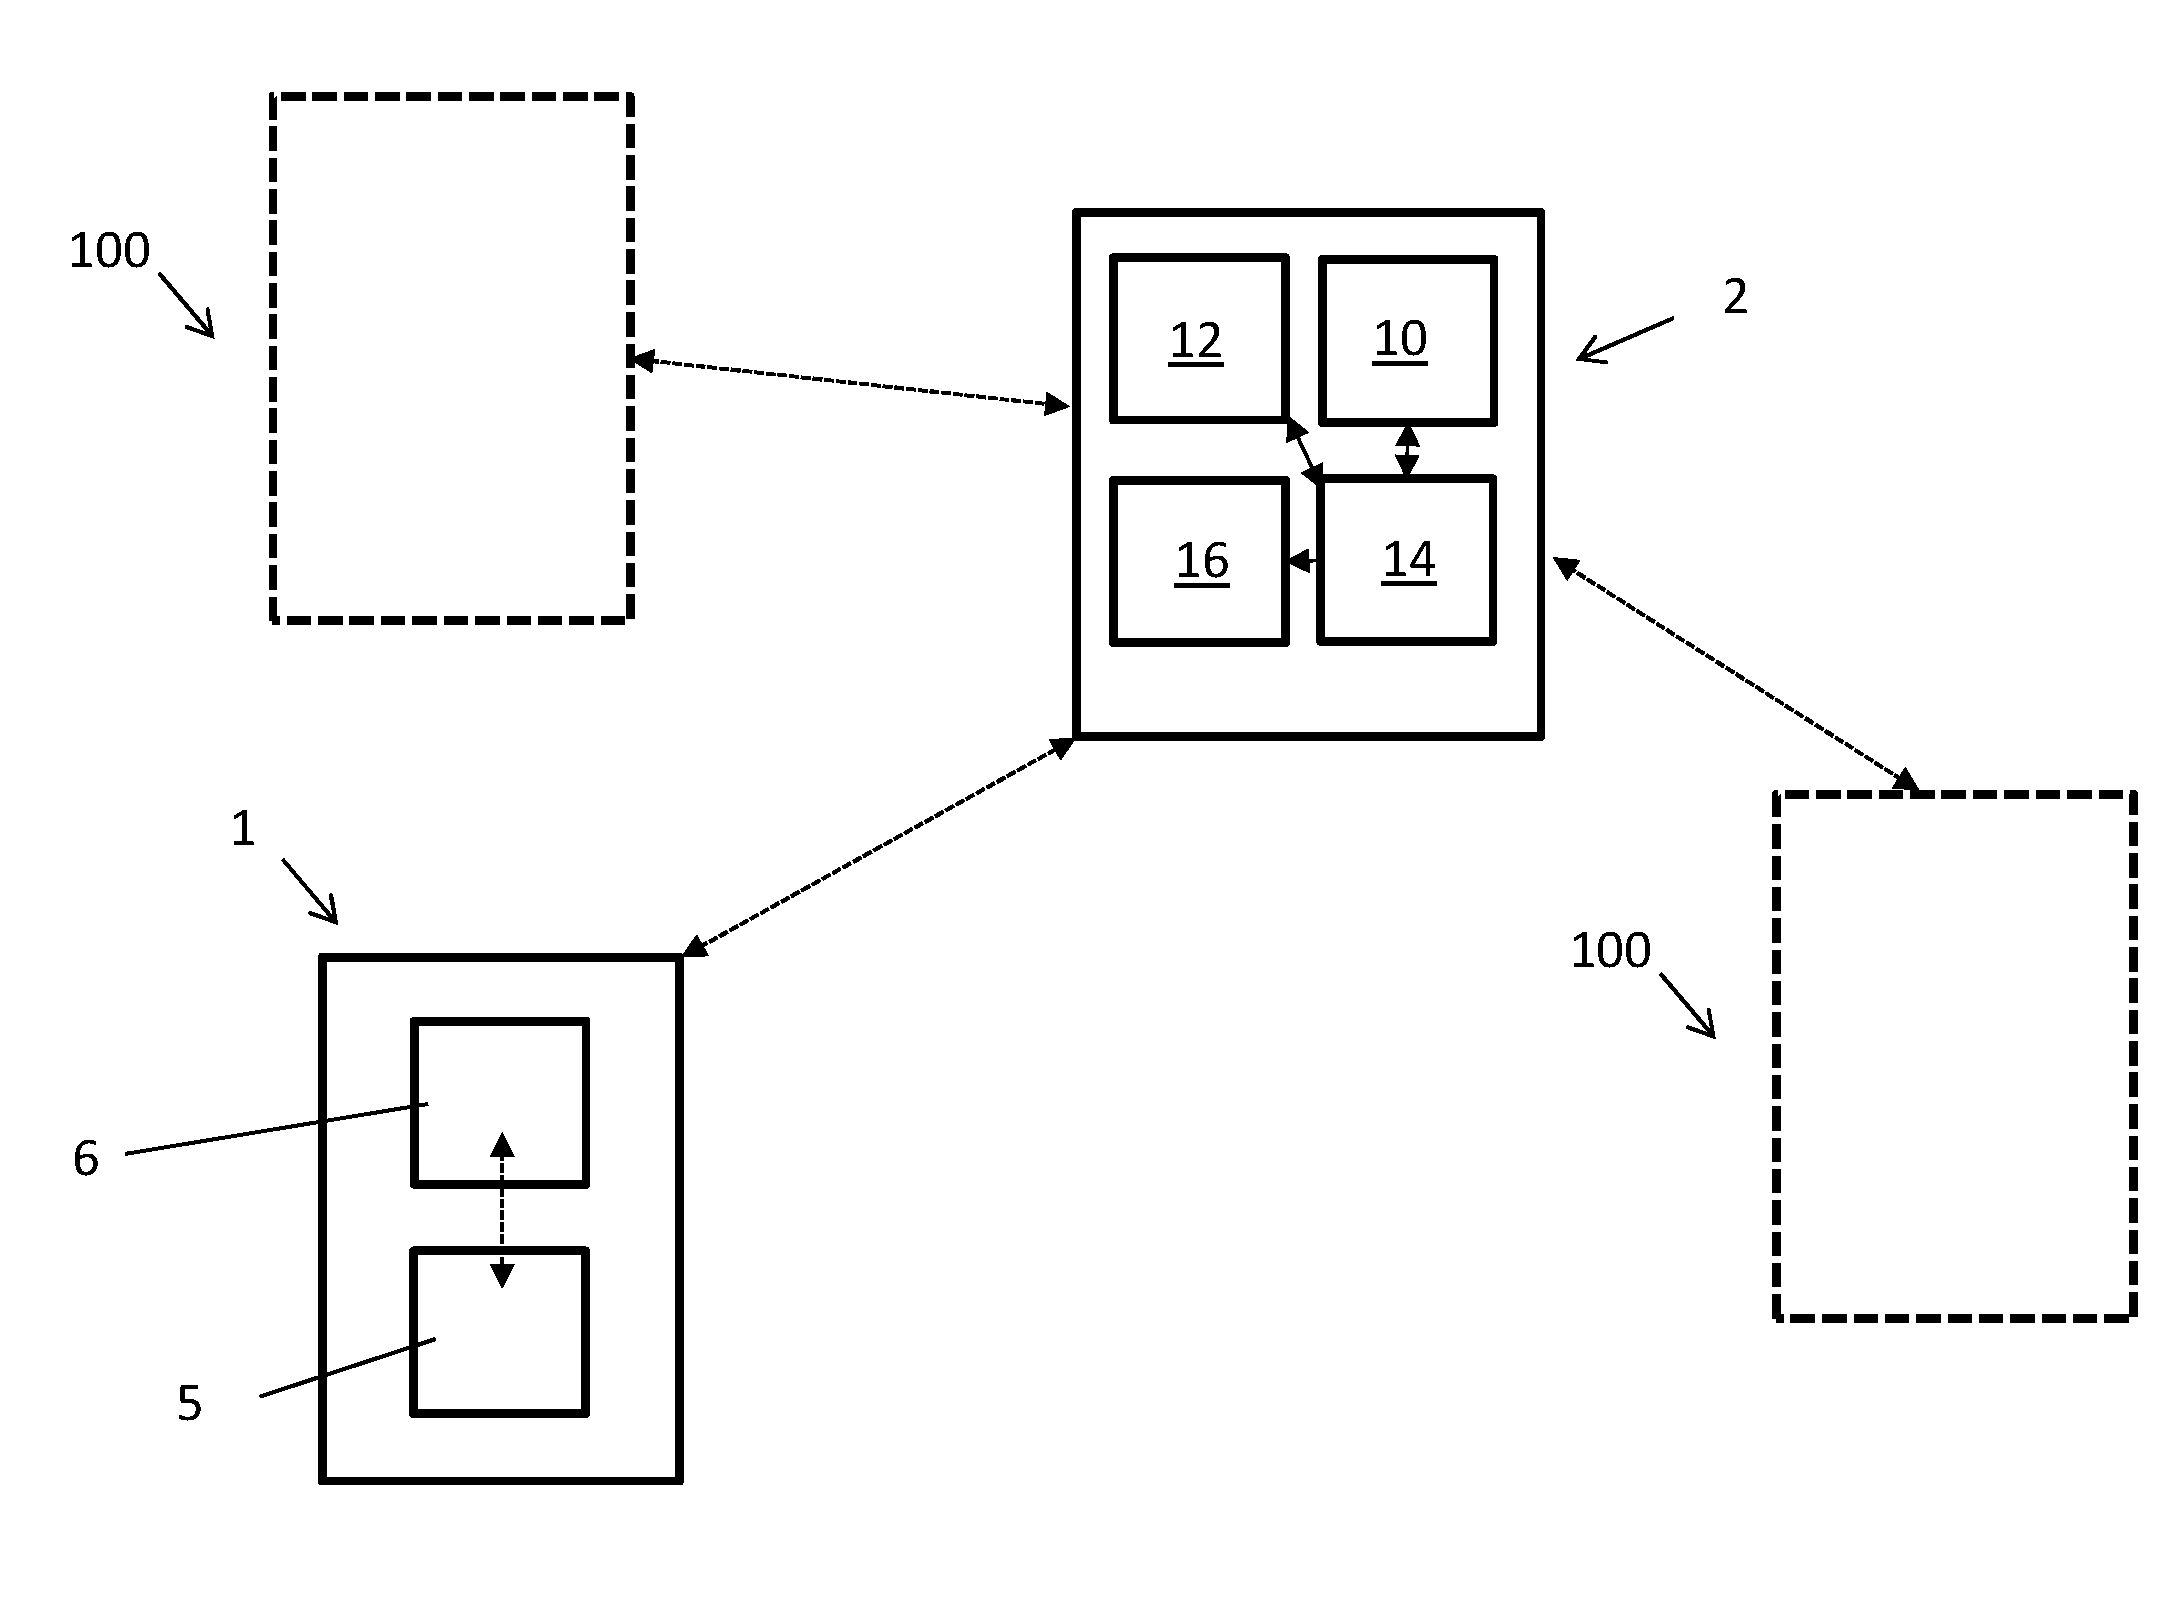 Method of providing positioning data to mobile device